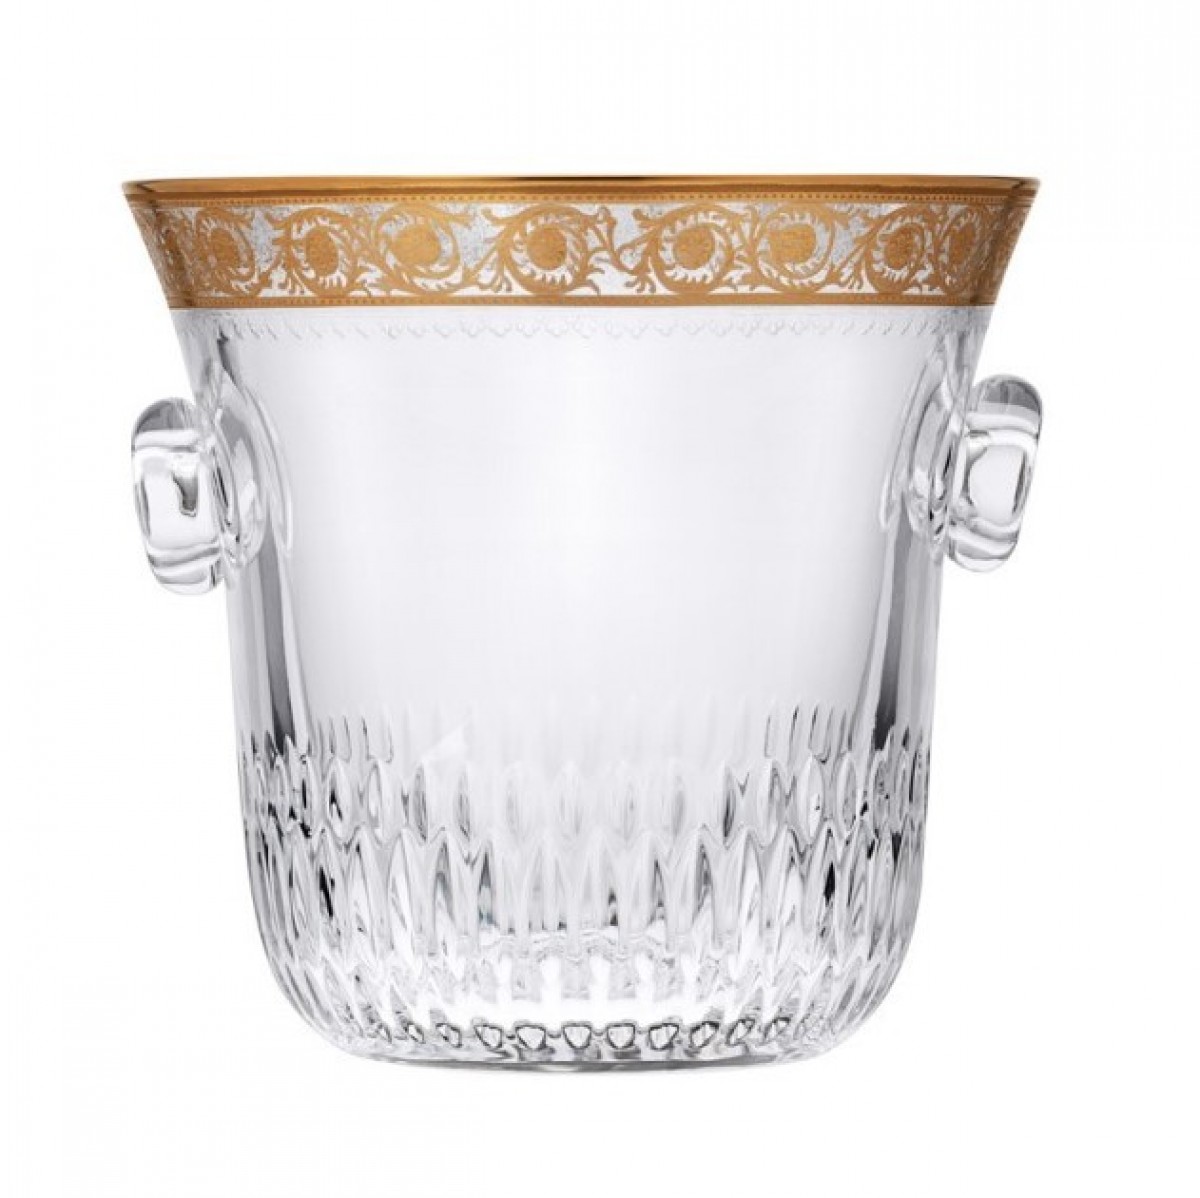 Thistle Champagne Bucket Gold Engraving - Clear | Highlight image